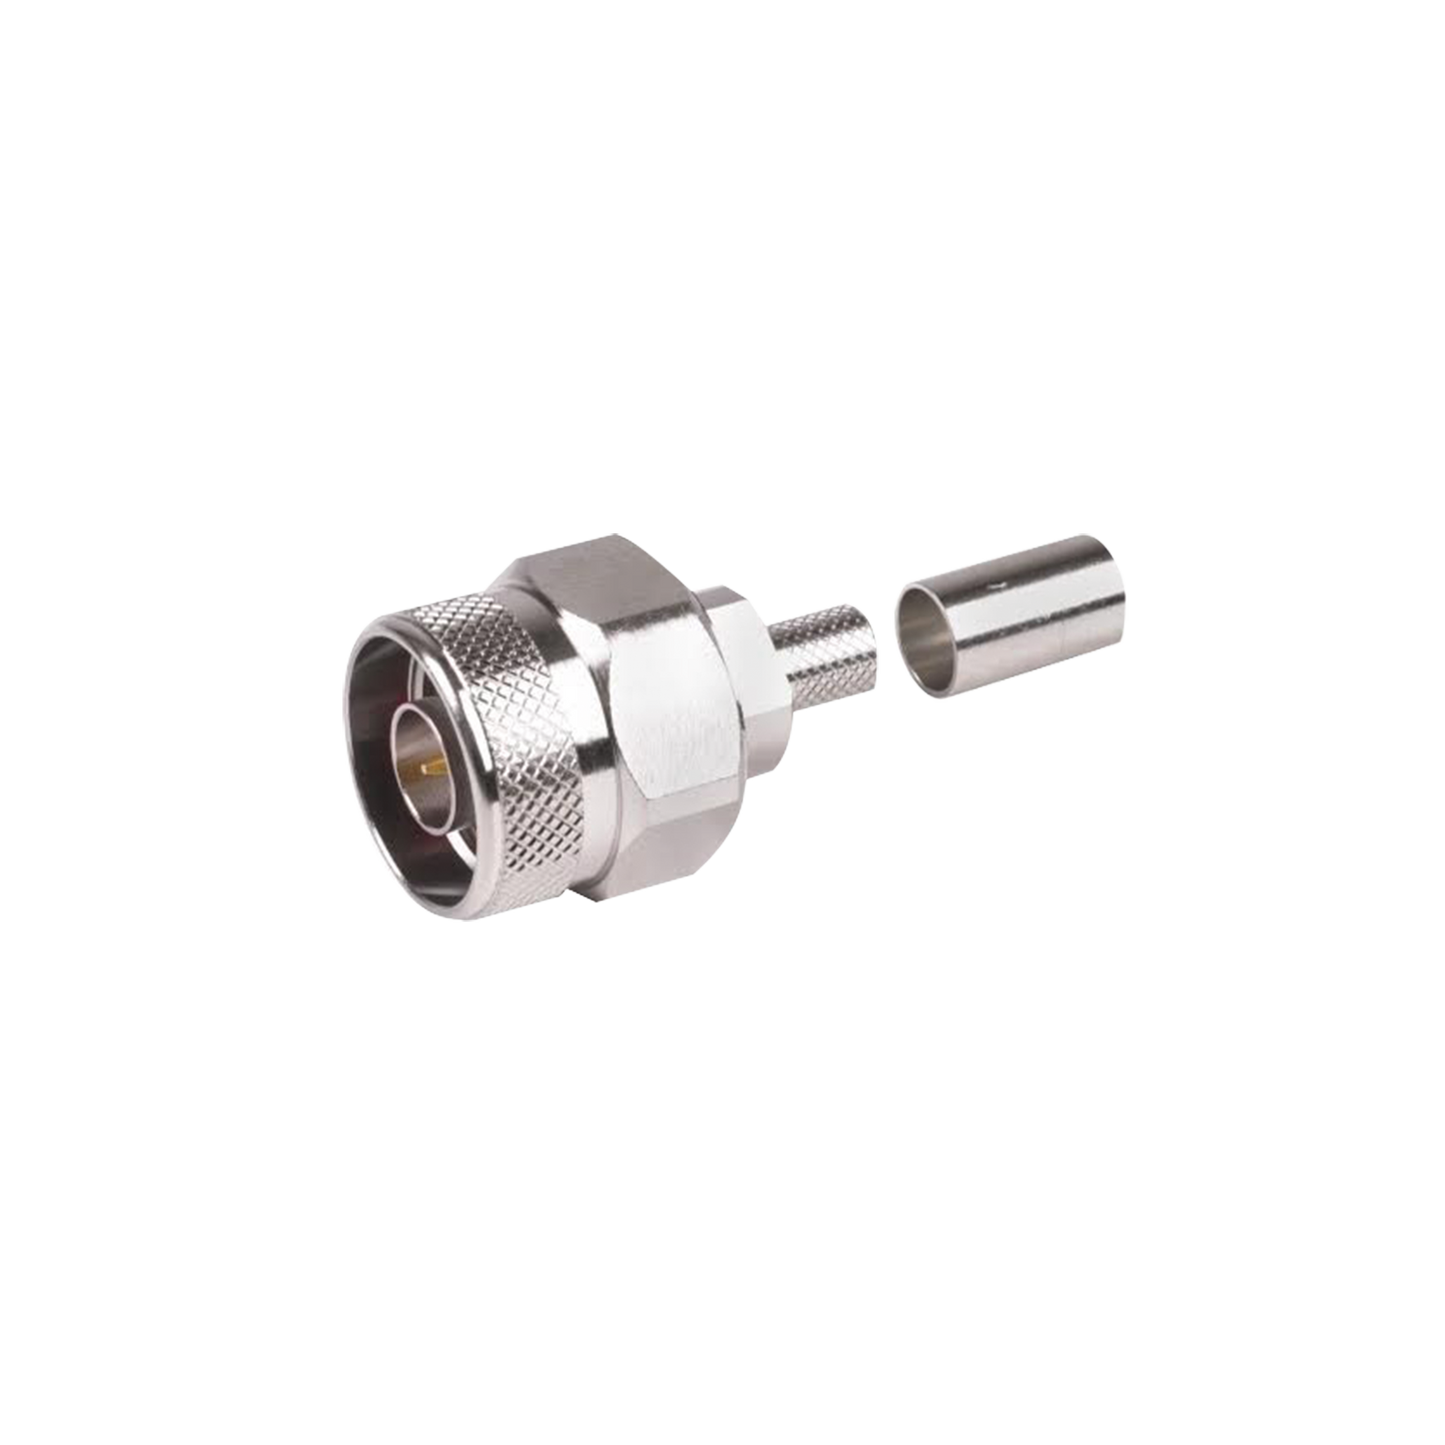 Hex N Male Connector and cautive PIN to Crimp on RG-8/X, LMR-240, 9258 Cables, Ni/Au/PTFE.